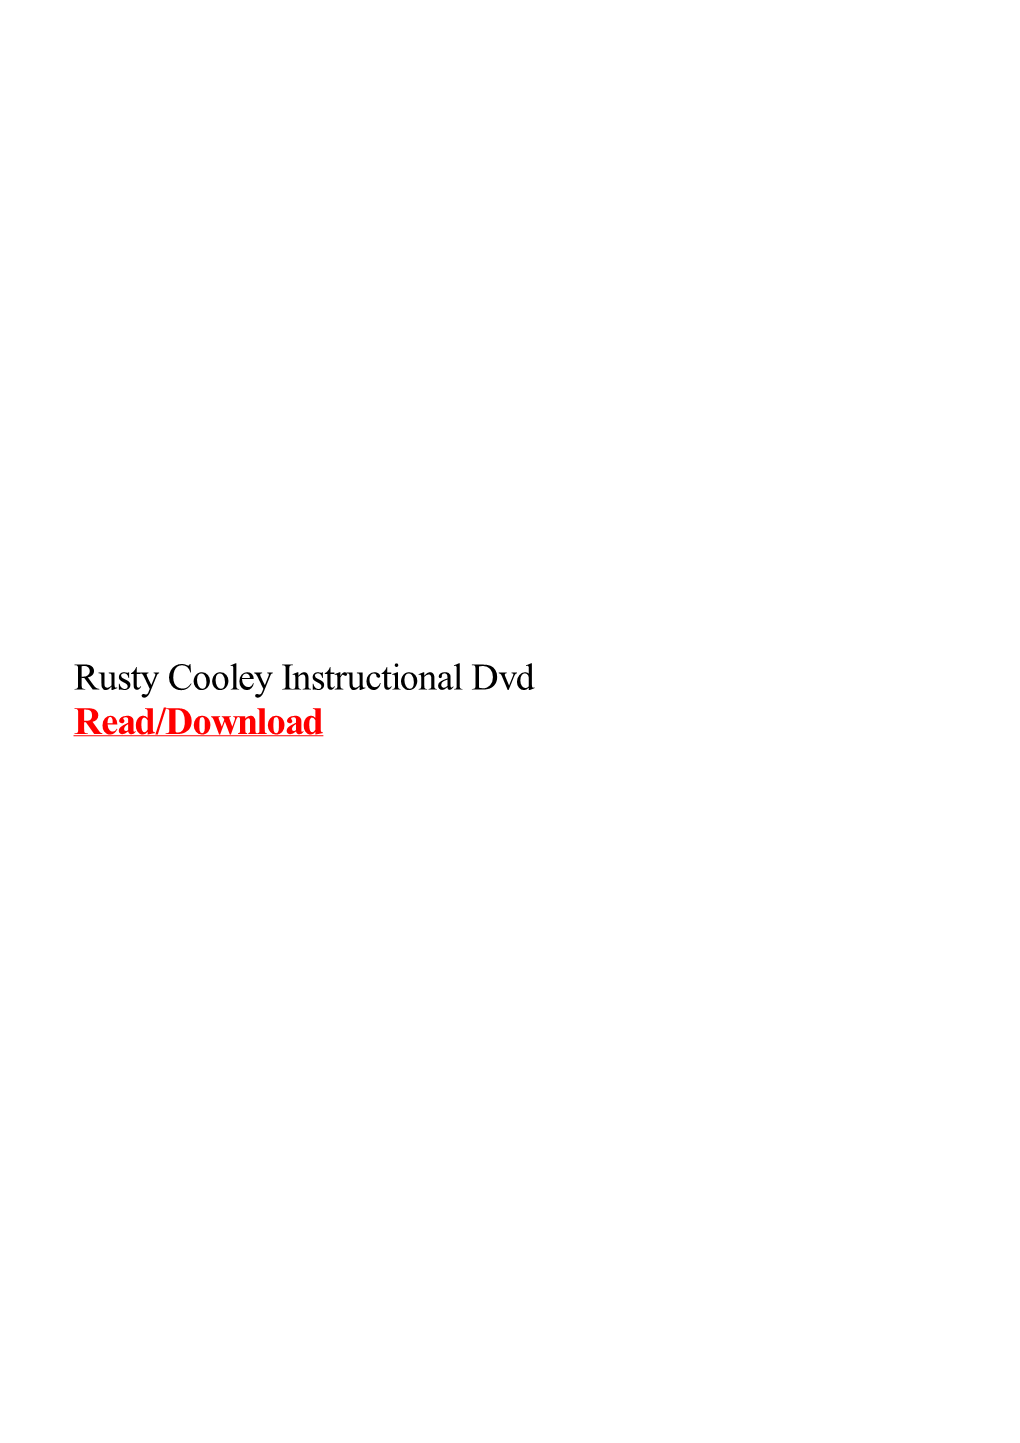 Rusty Cooley Instructional Dvd